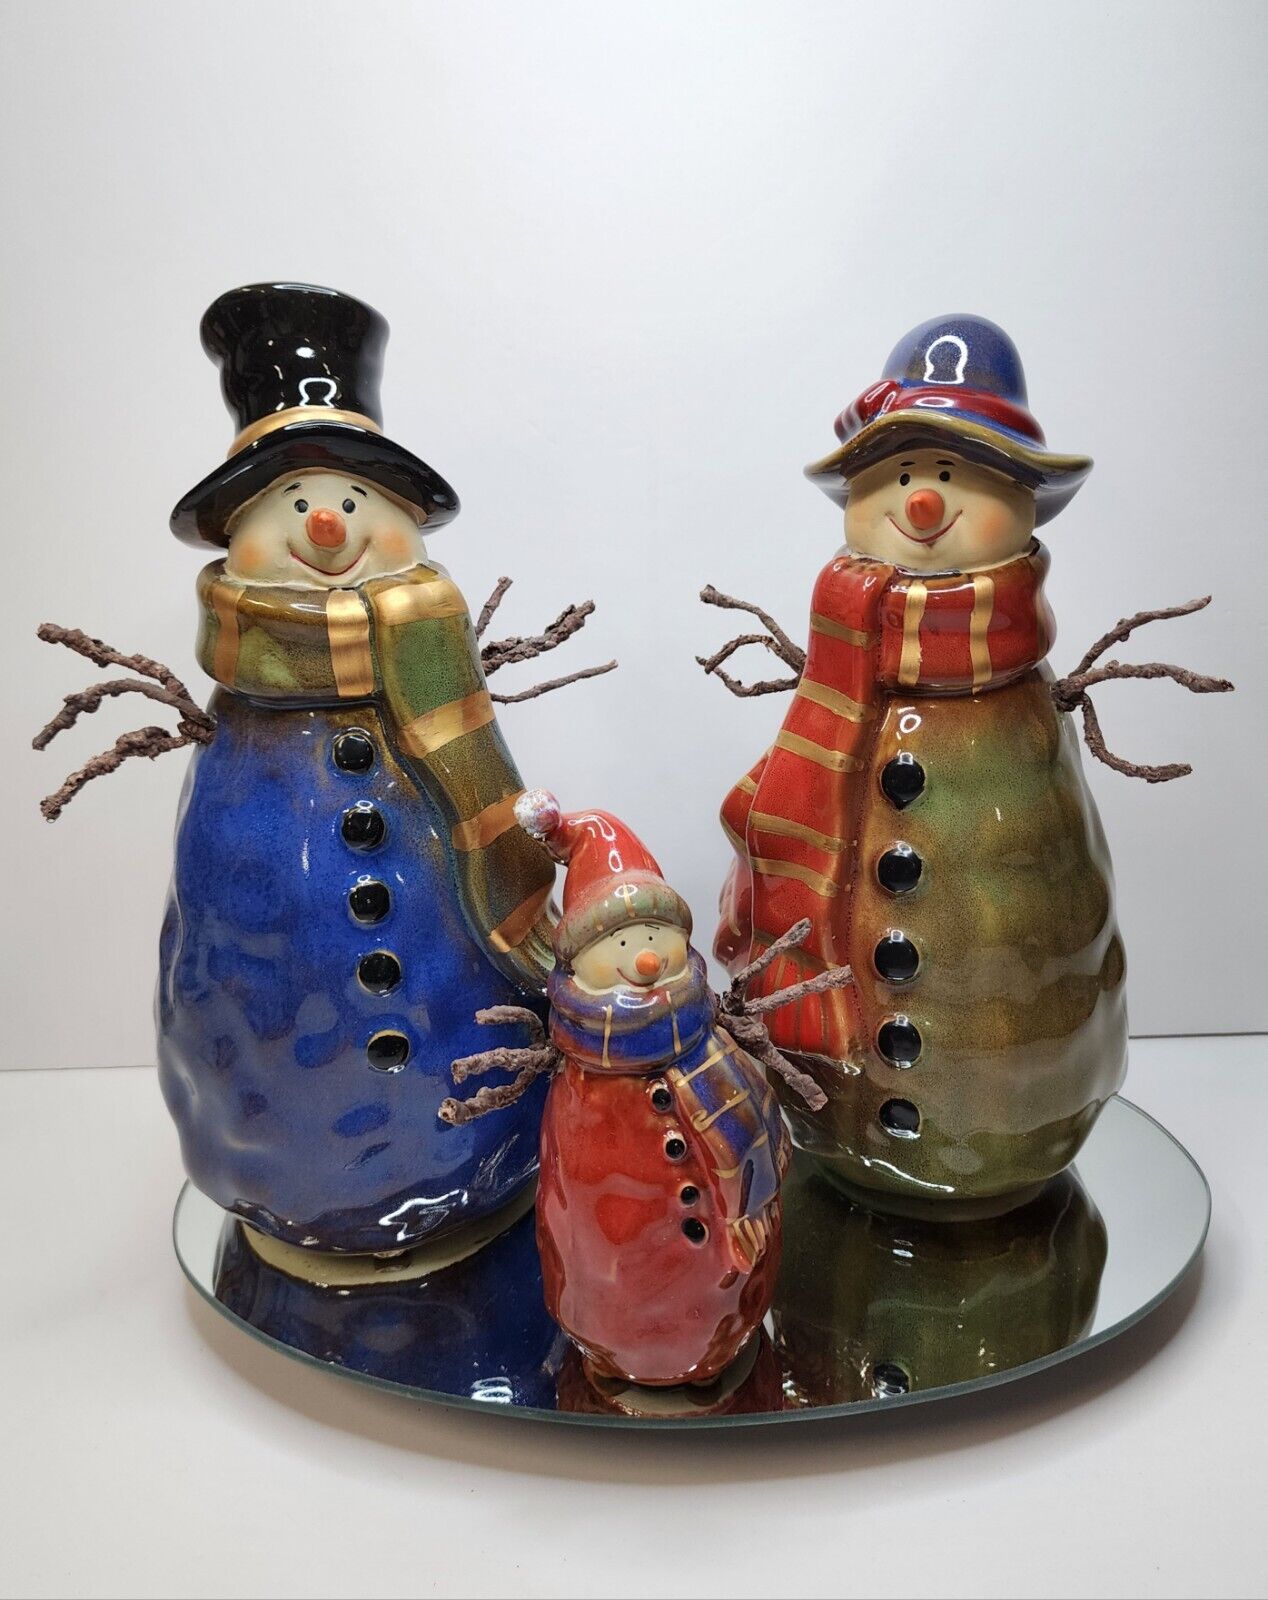 Vintage Kirklands Potters Garden Snowman Family With Mirrored Display Tray & Box